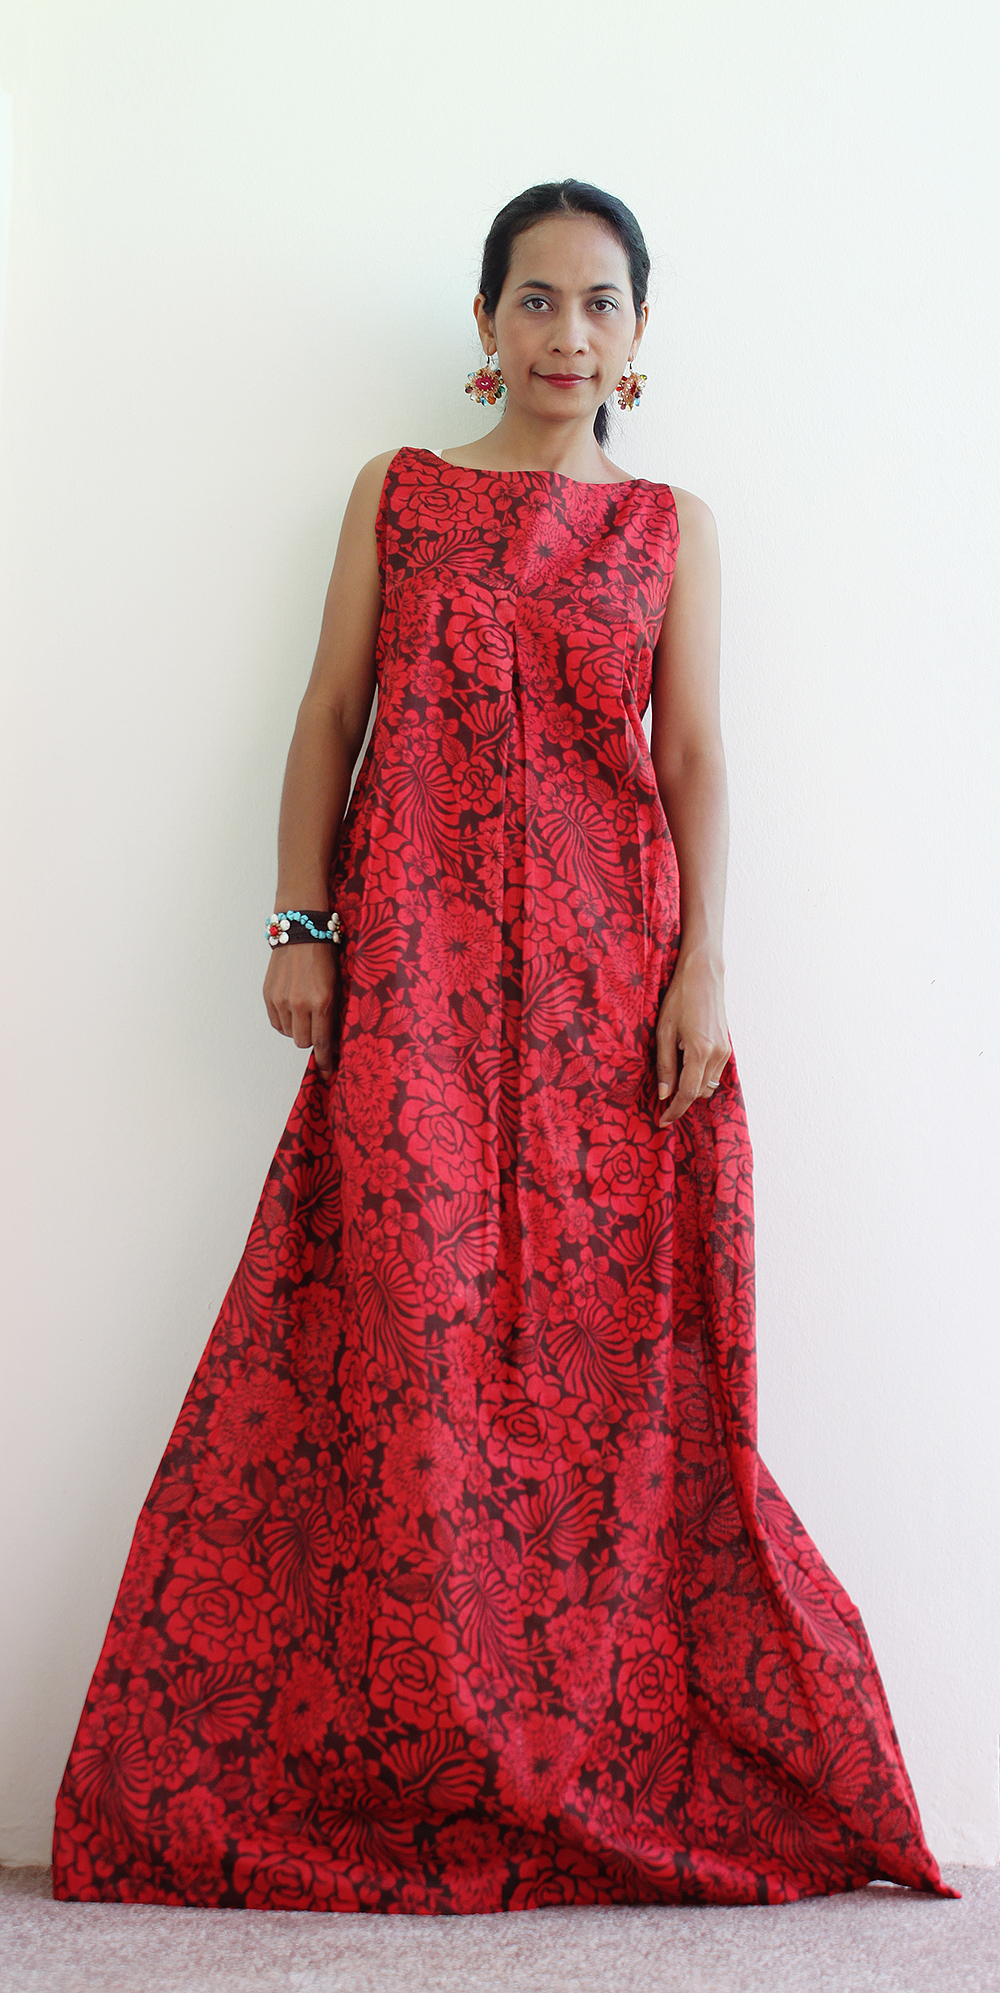 Red Floral Maxi Dress - Sleeveless Summer Dress : Happy Holiday ...